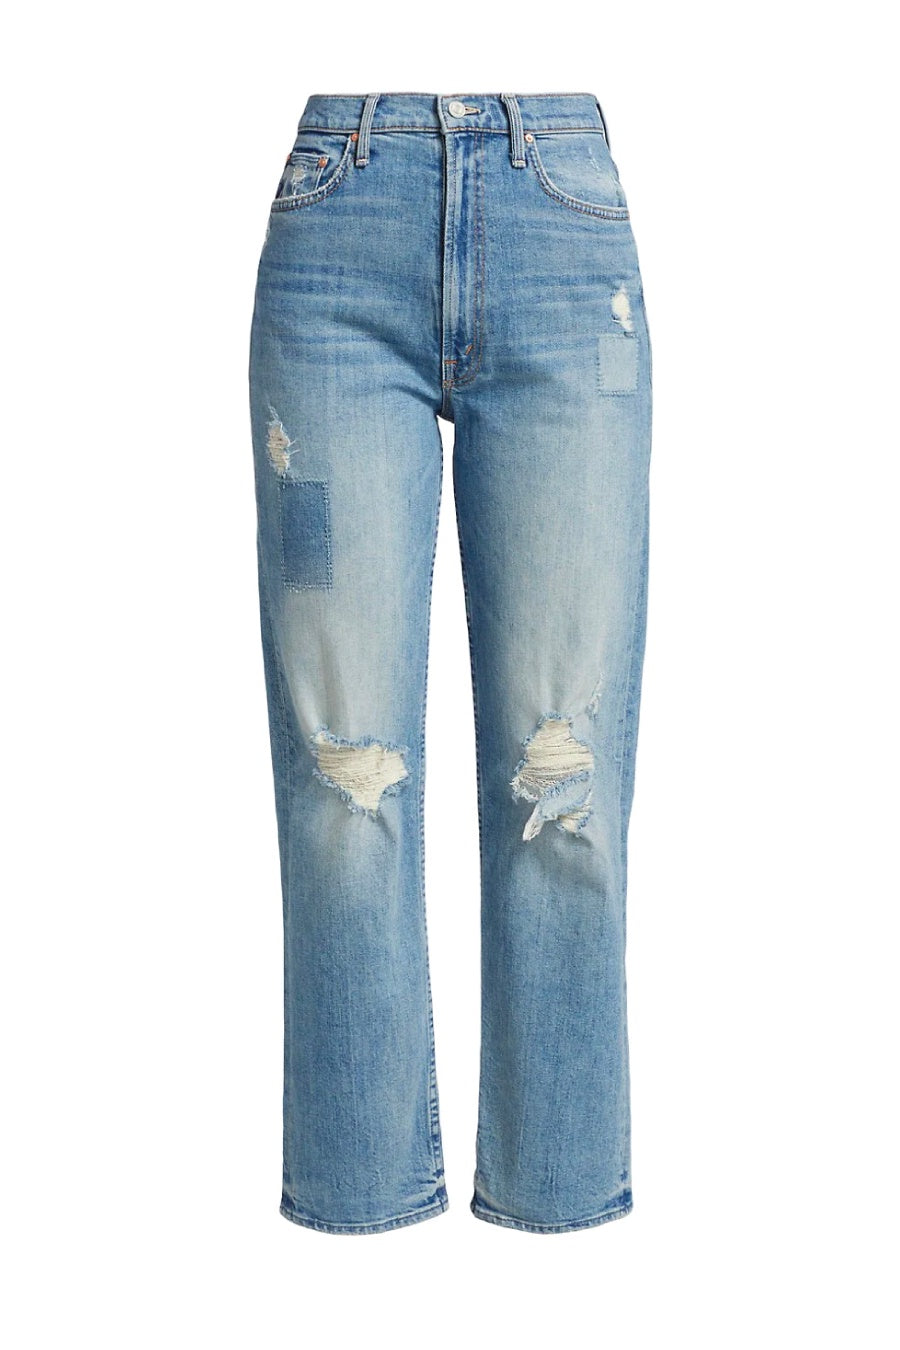 Mother Denim The High Waisted Study Hover Jean - We Are Castaways